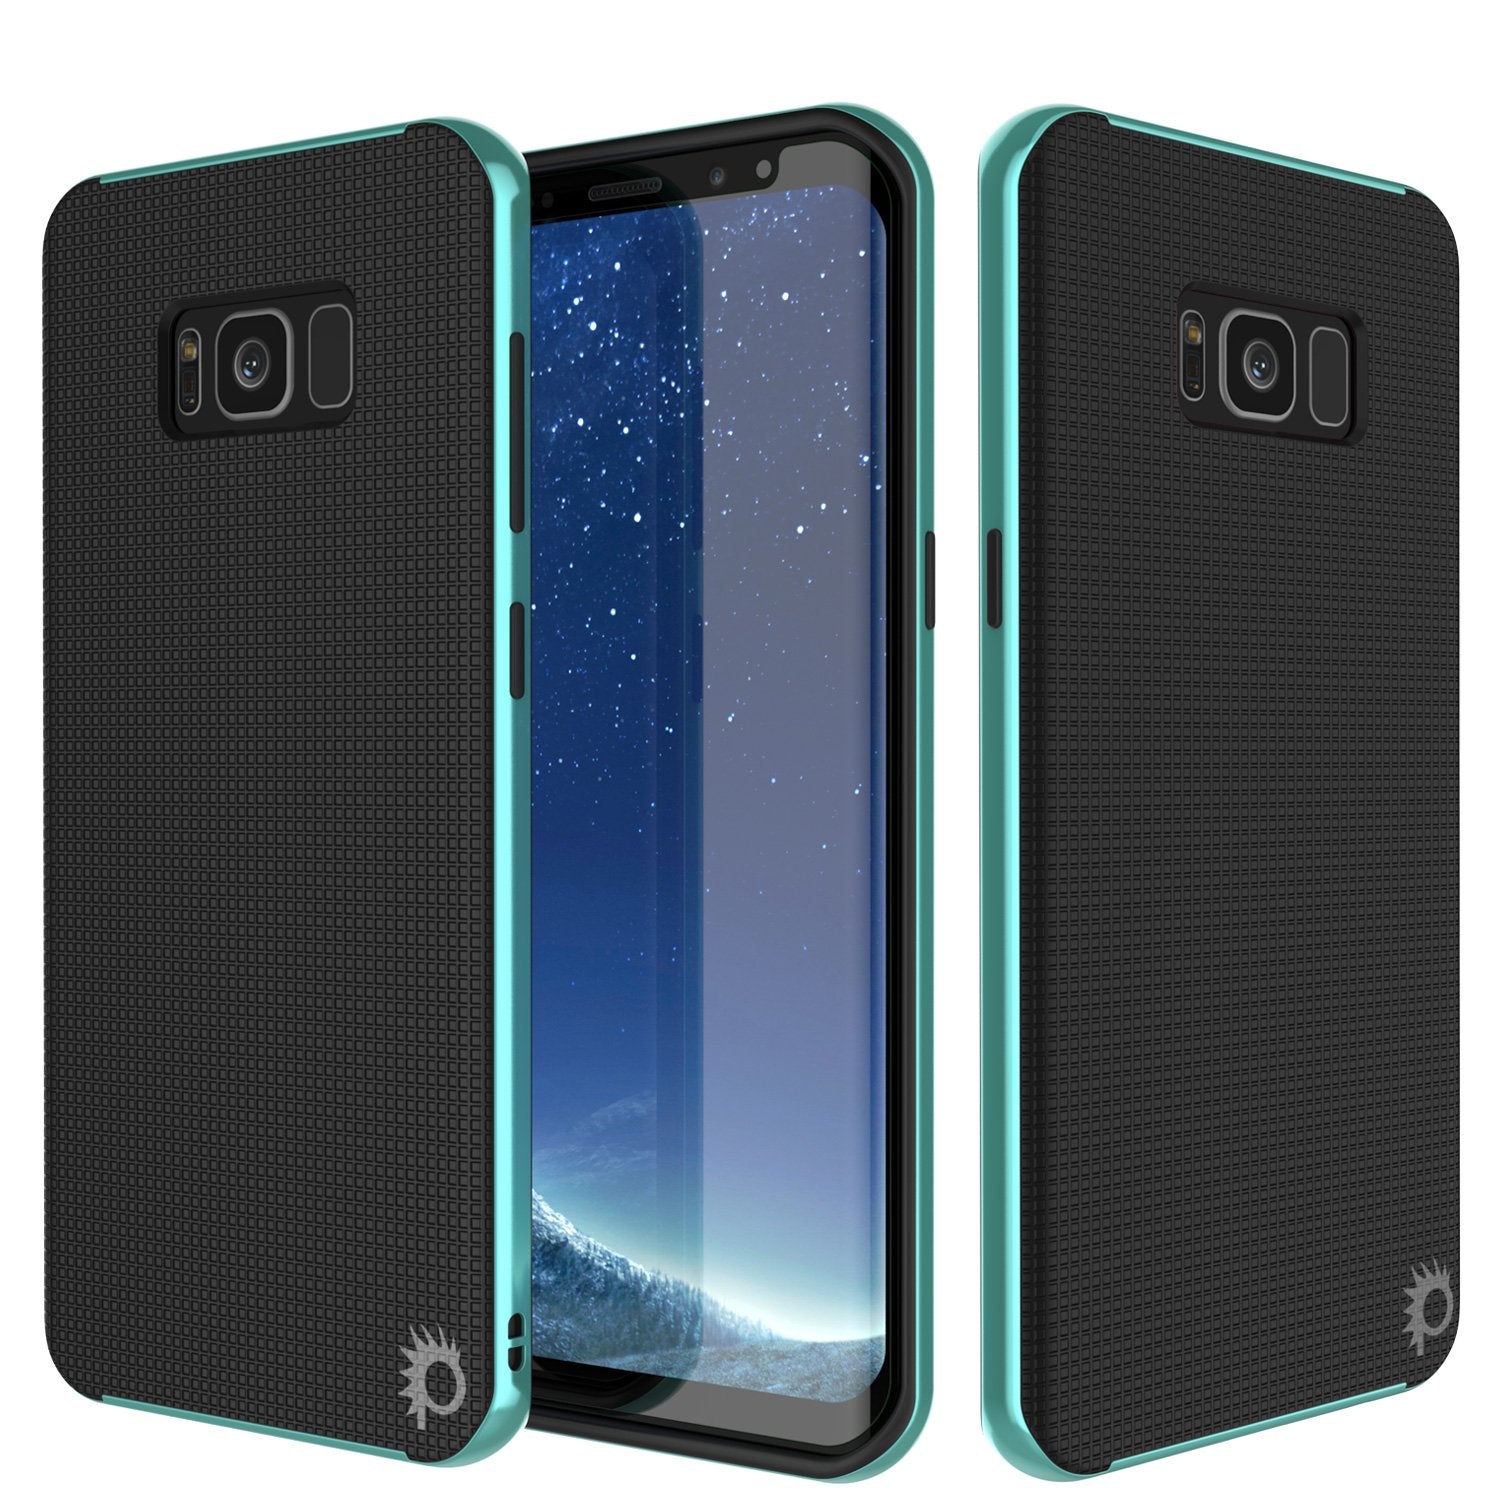 Galaxy S8 PLUS Case, PunkCase Stealth Teal Series Hybrid 3-Piece Shockproof Dual Layer Cover